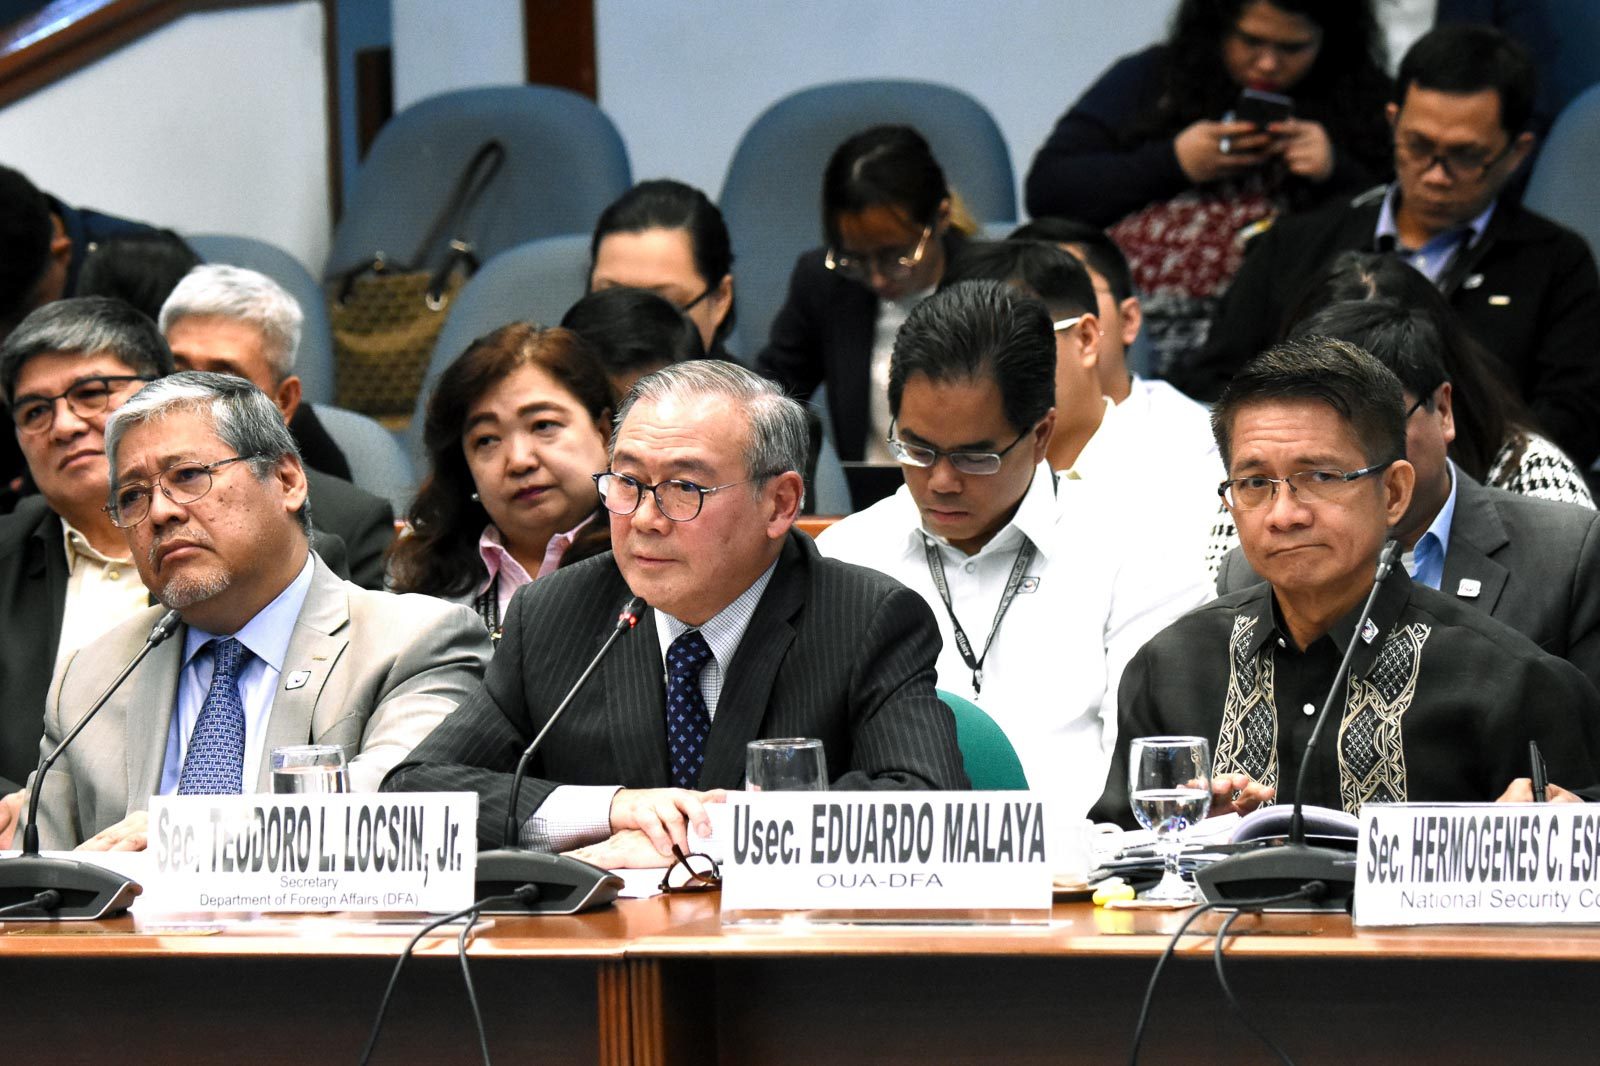 FULL TEXT: Locsin on impact assessment of VFA termination